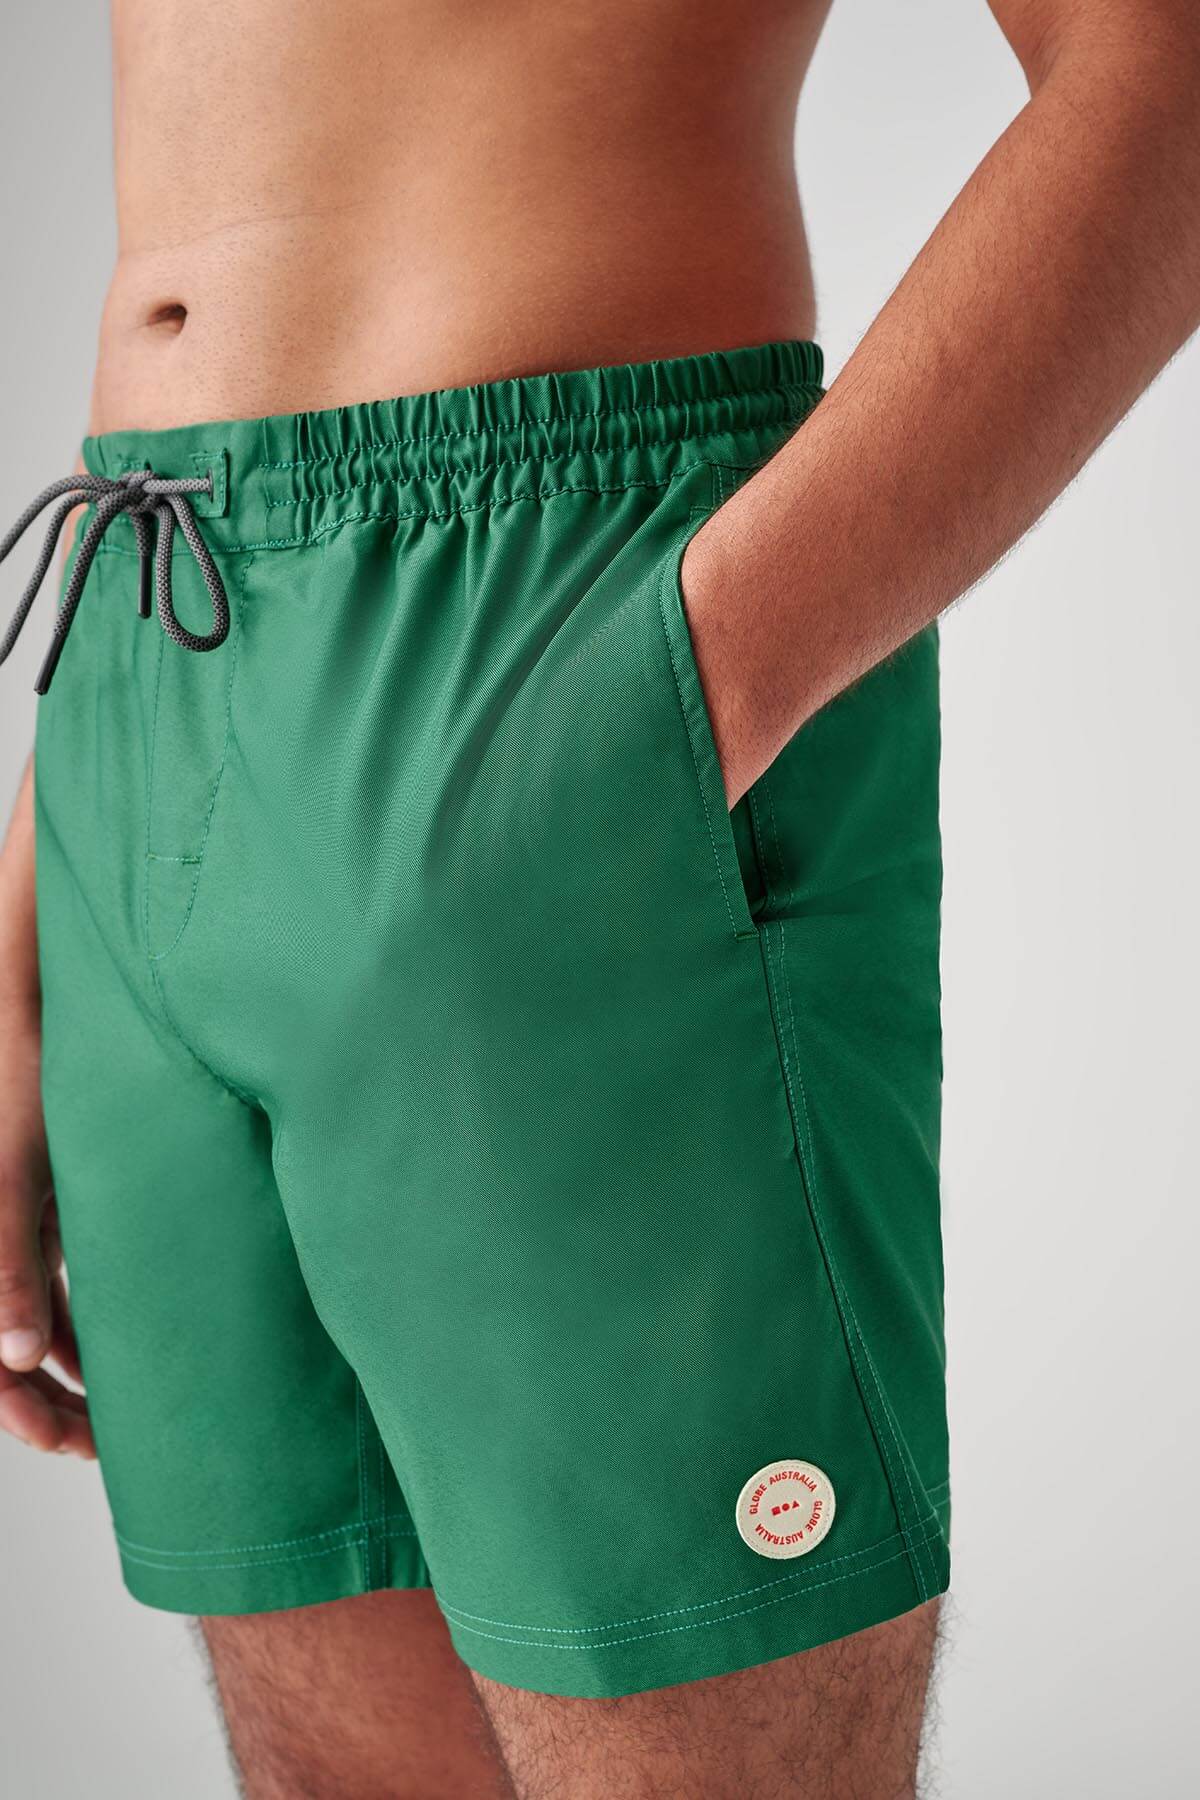 clean swell poolshort palm